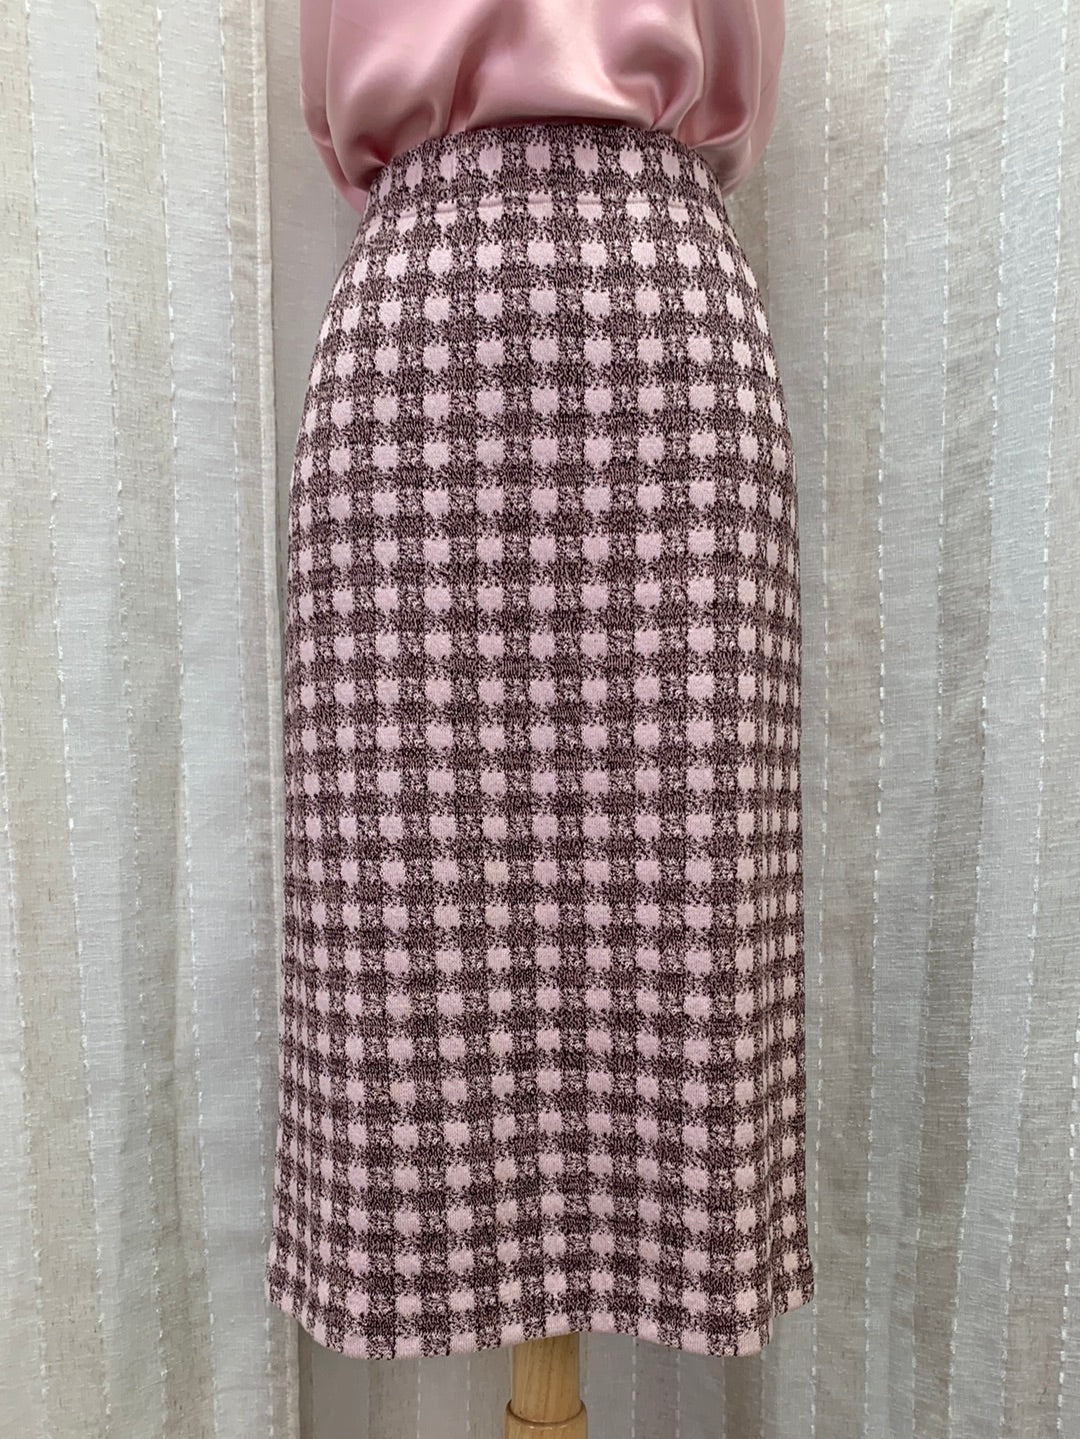 ST JOHN COLLECTION / MARIE GRAY pink brown Knit Texture Pull On Midi Skirt - 10